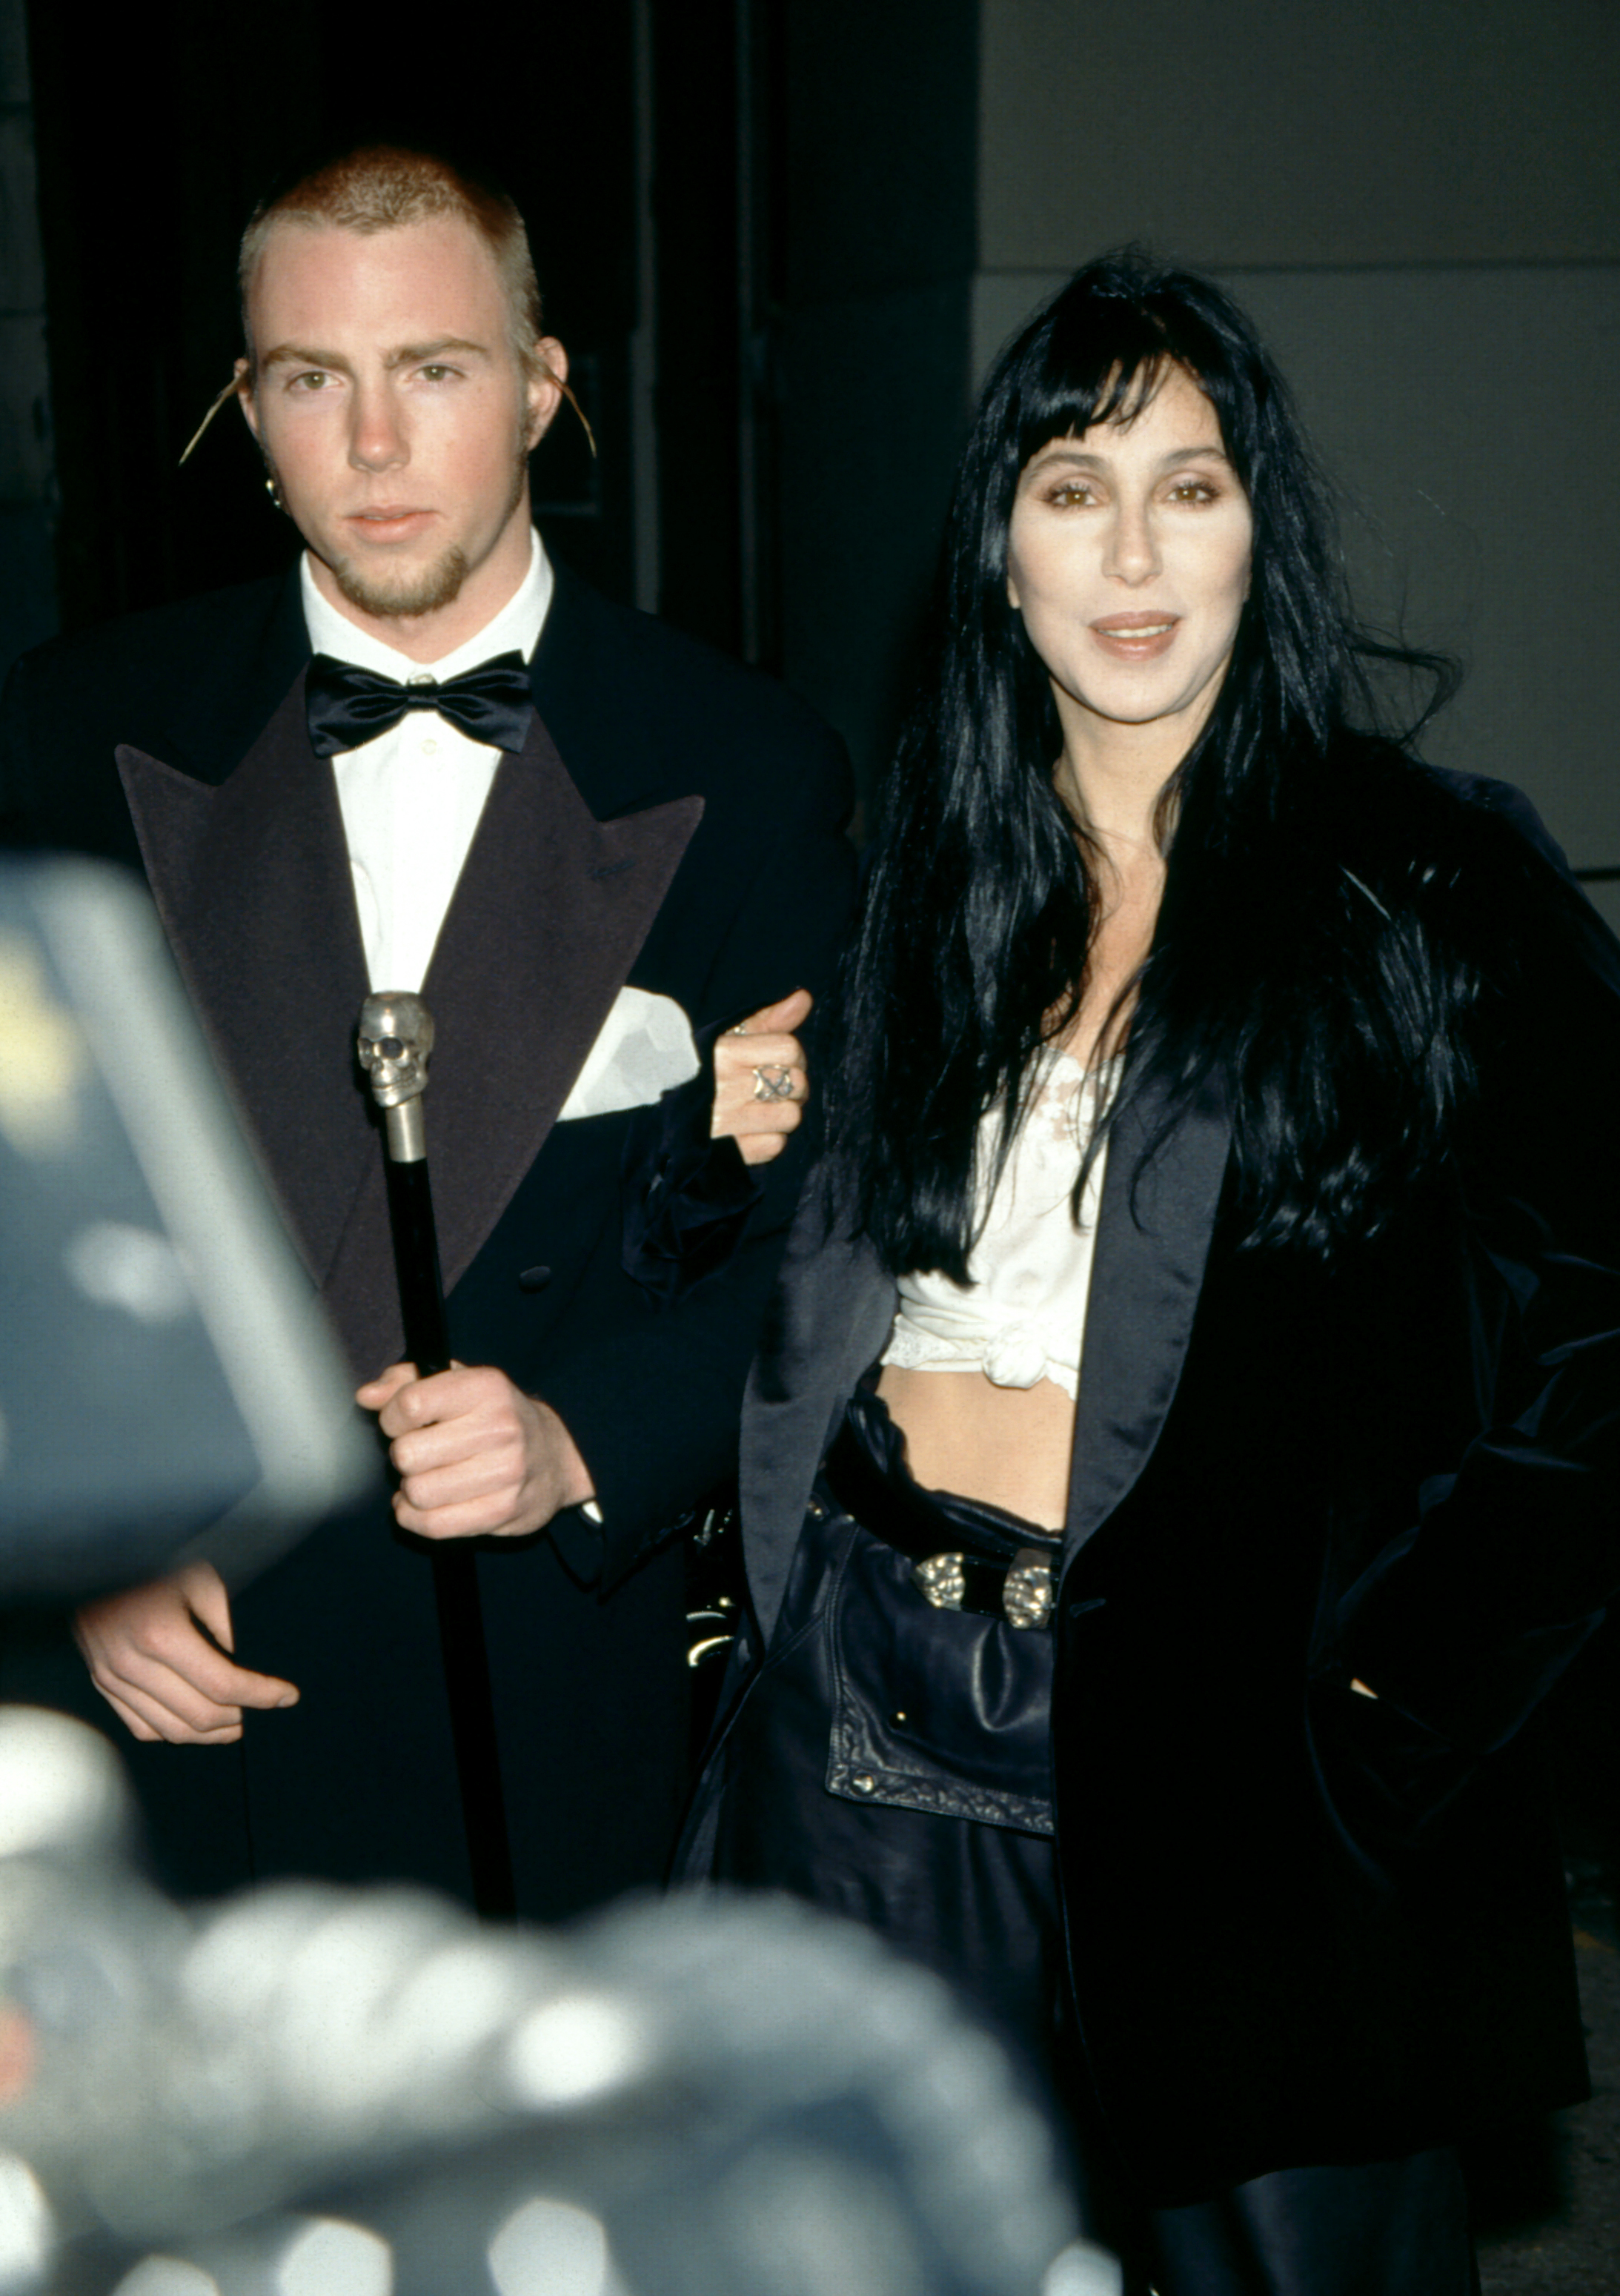 Elijah Blue Allman and Cher attend the 5th Annual Fire and Ice Ball to Benefit Revlon UCLA Women Cancer Center in Century City, California, on December 7, 1994. | Source: Getty Images